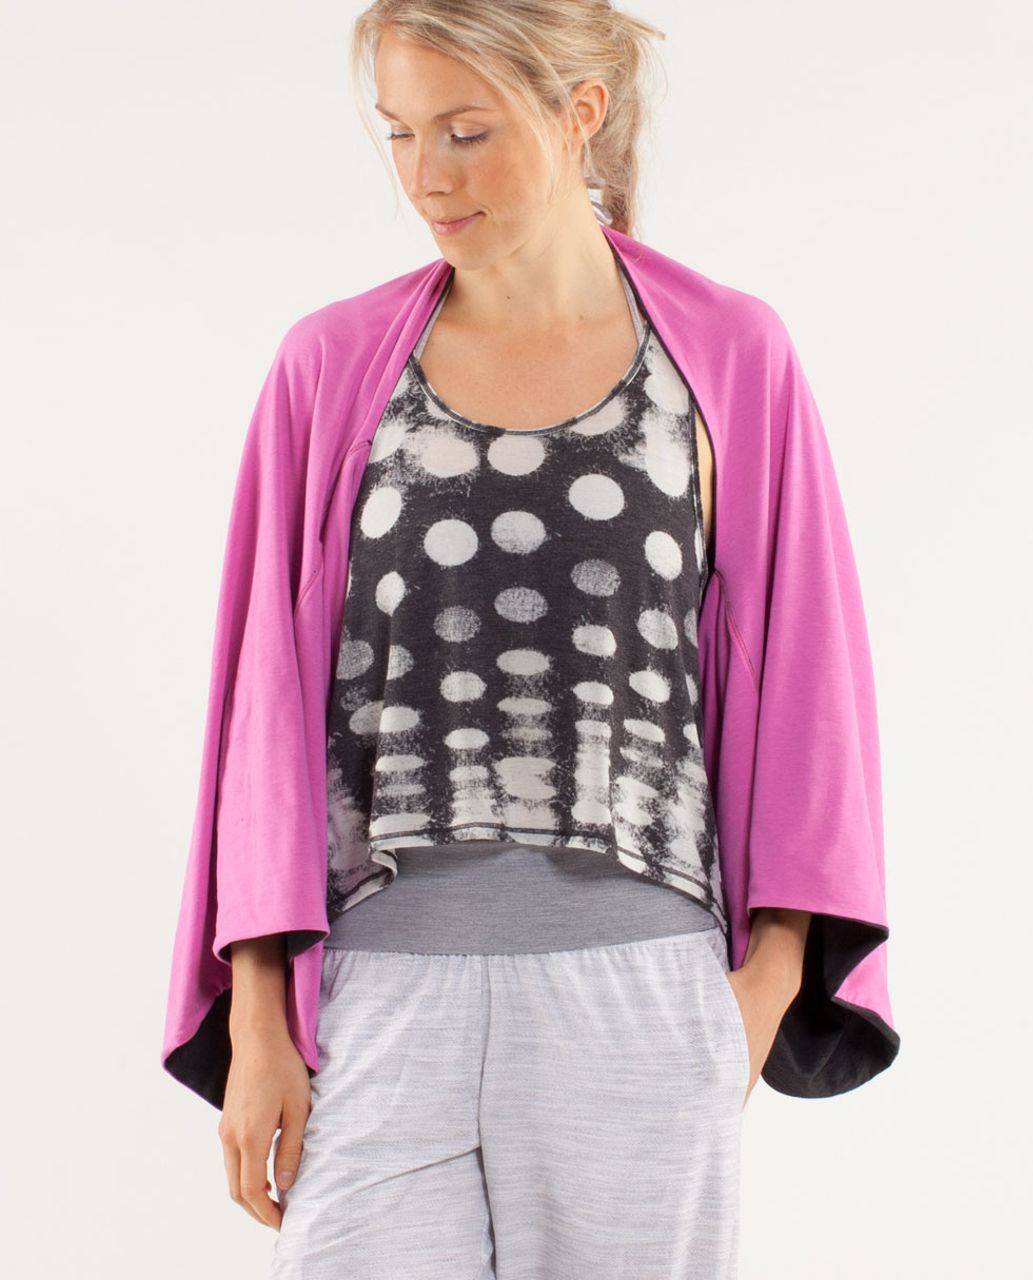 Lululemon Covers It All Dress - Pow Pink / Heathered Charcoal